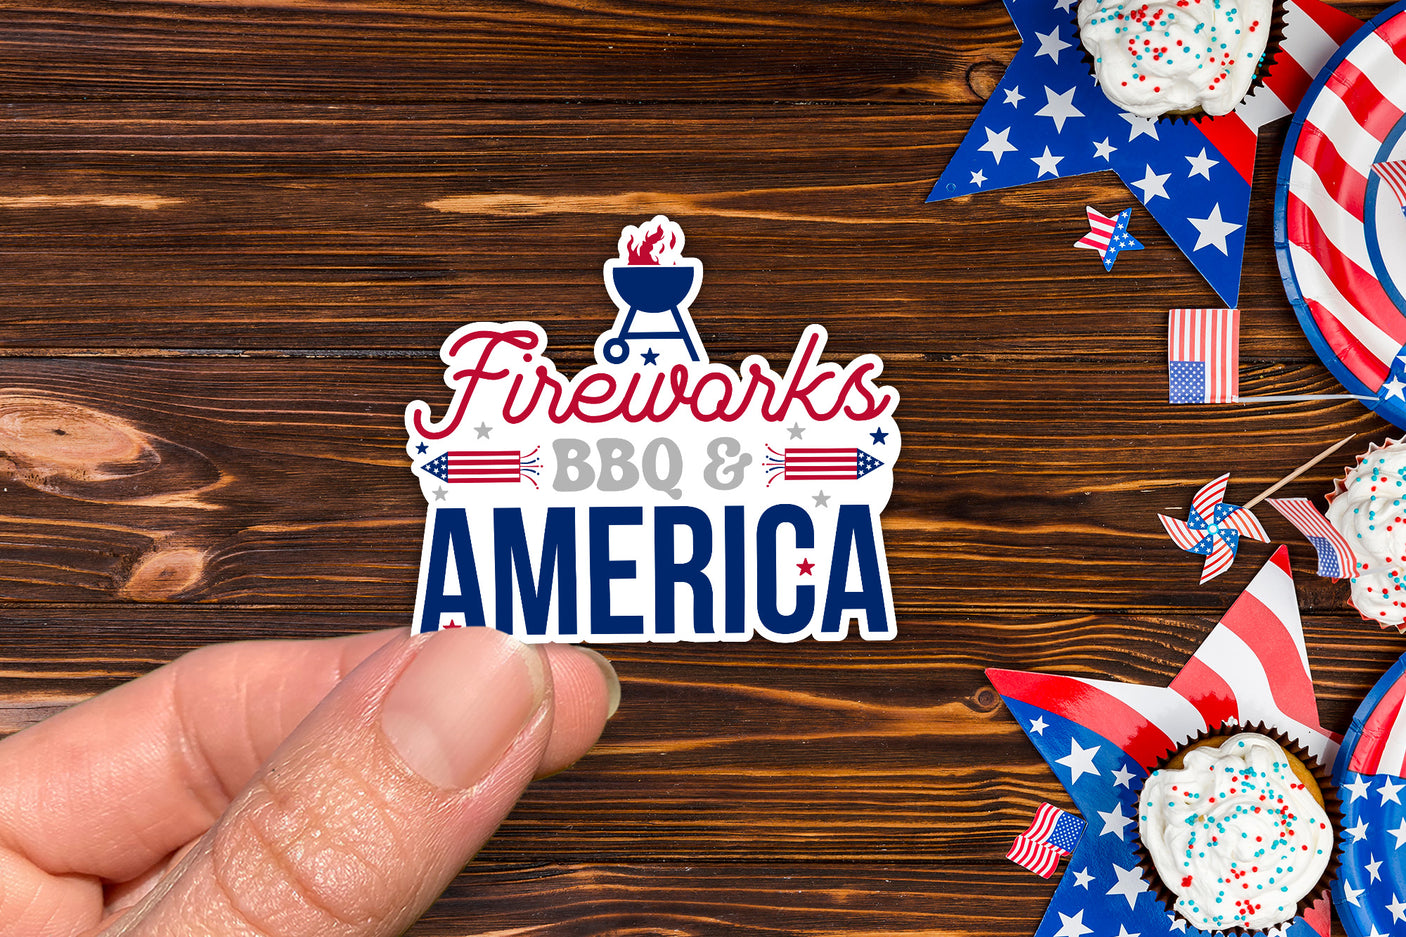 4th of July PNG Sticker | Fireworks BBQ & America